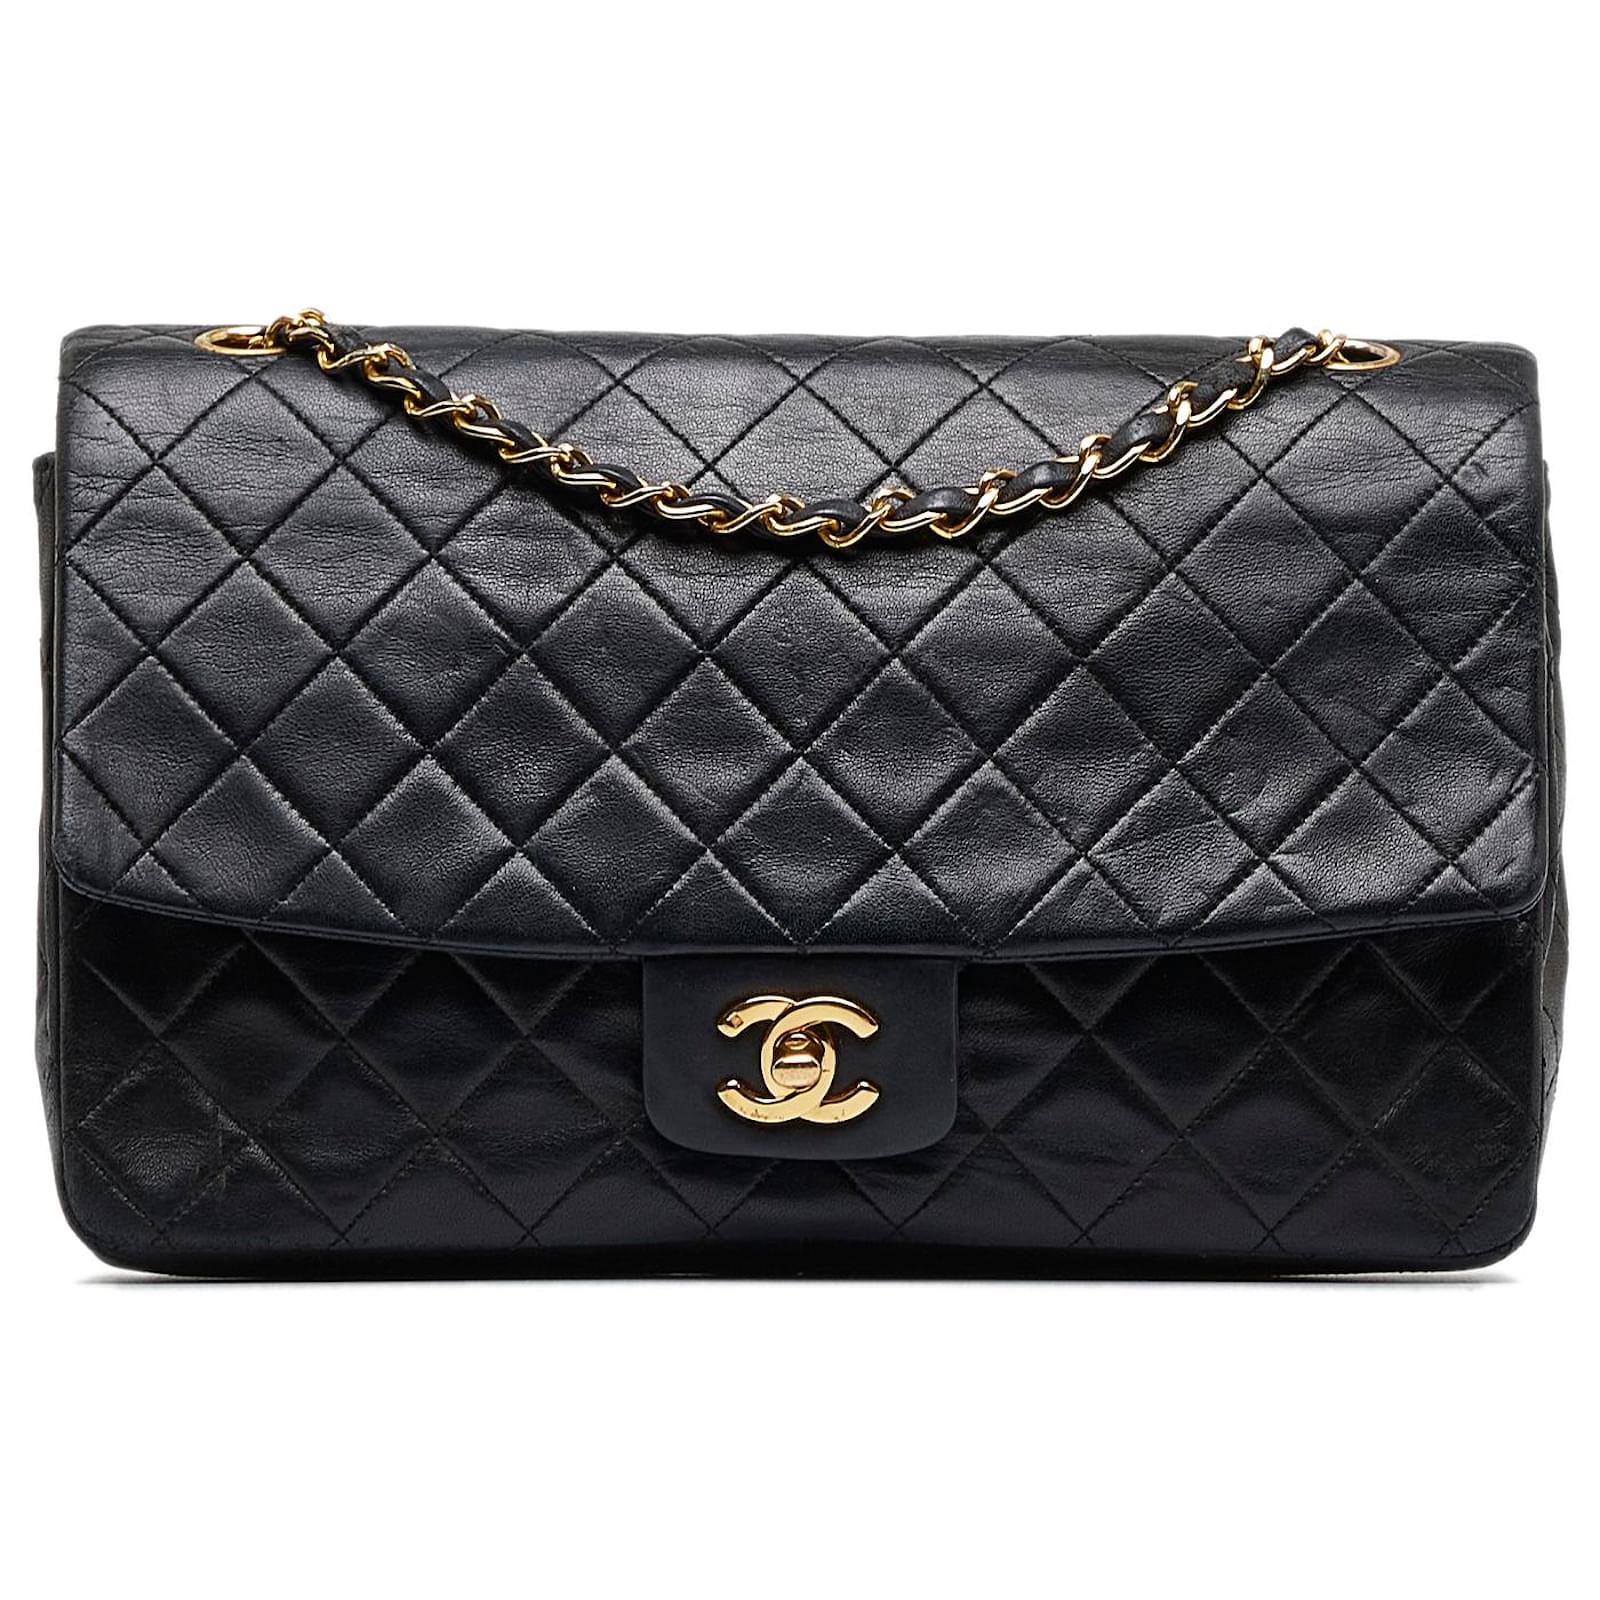 the chanel store bag